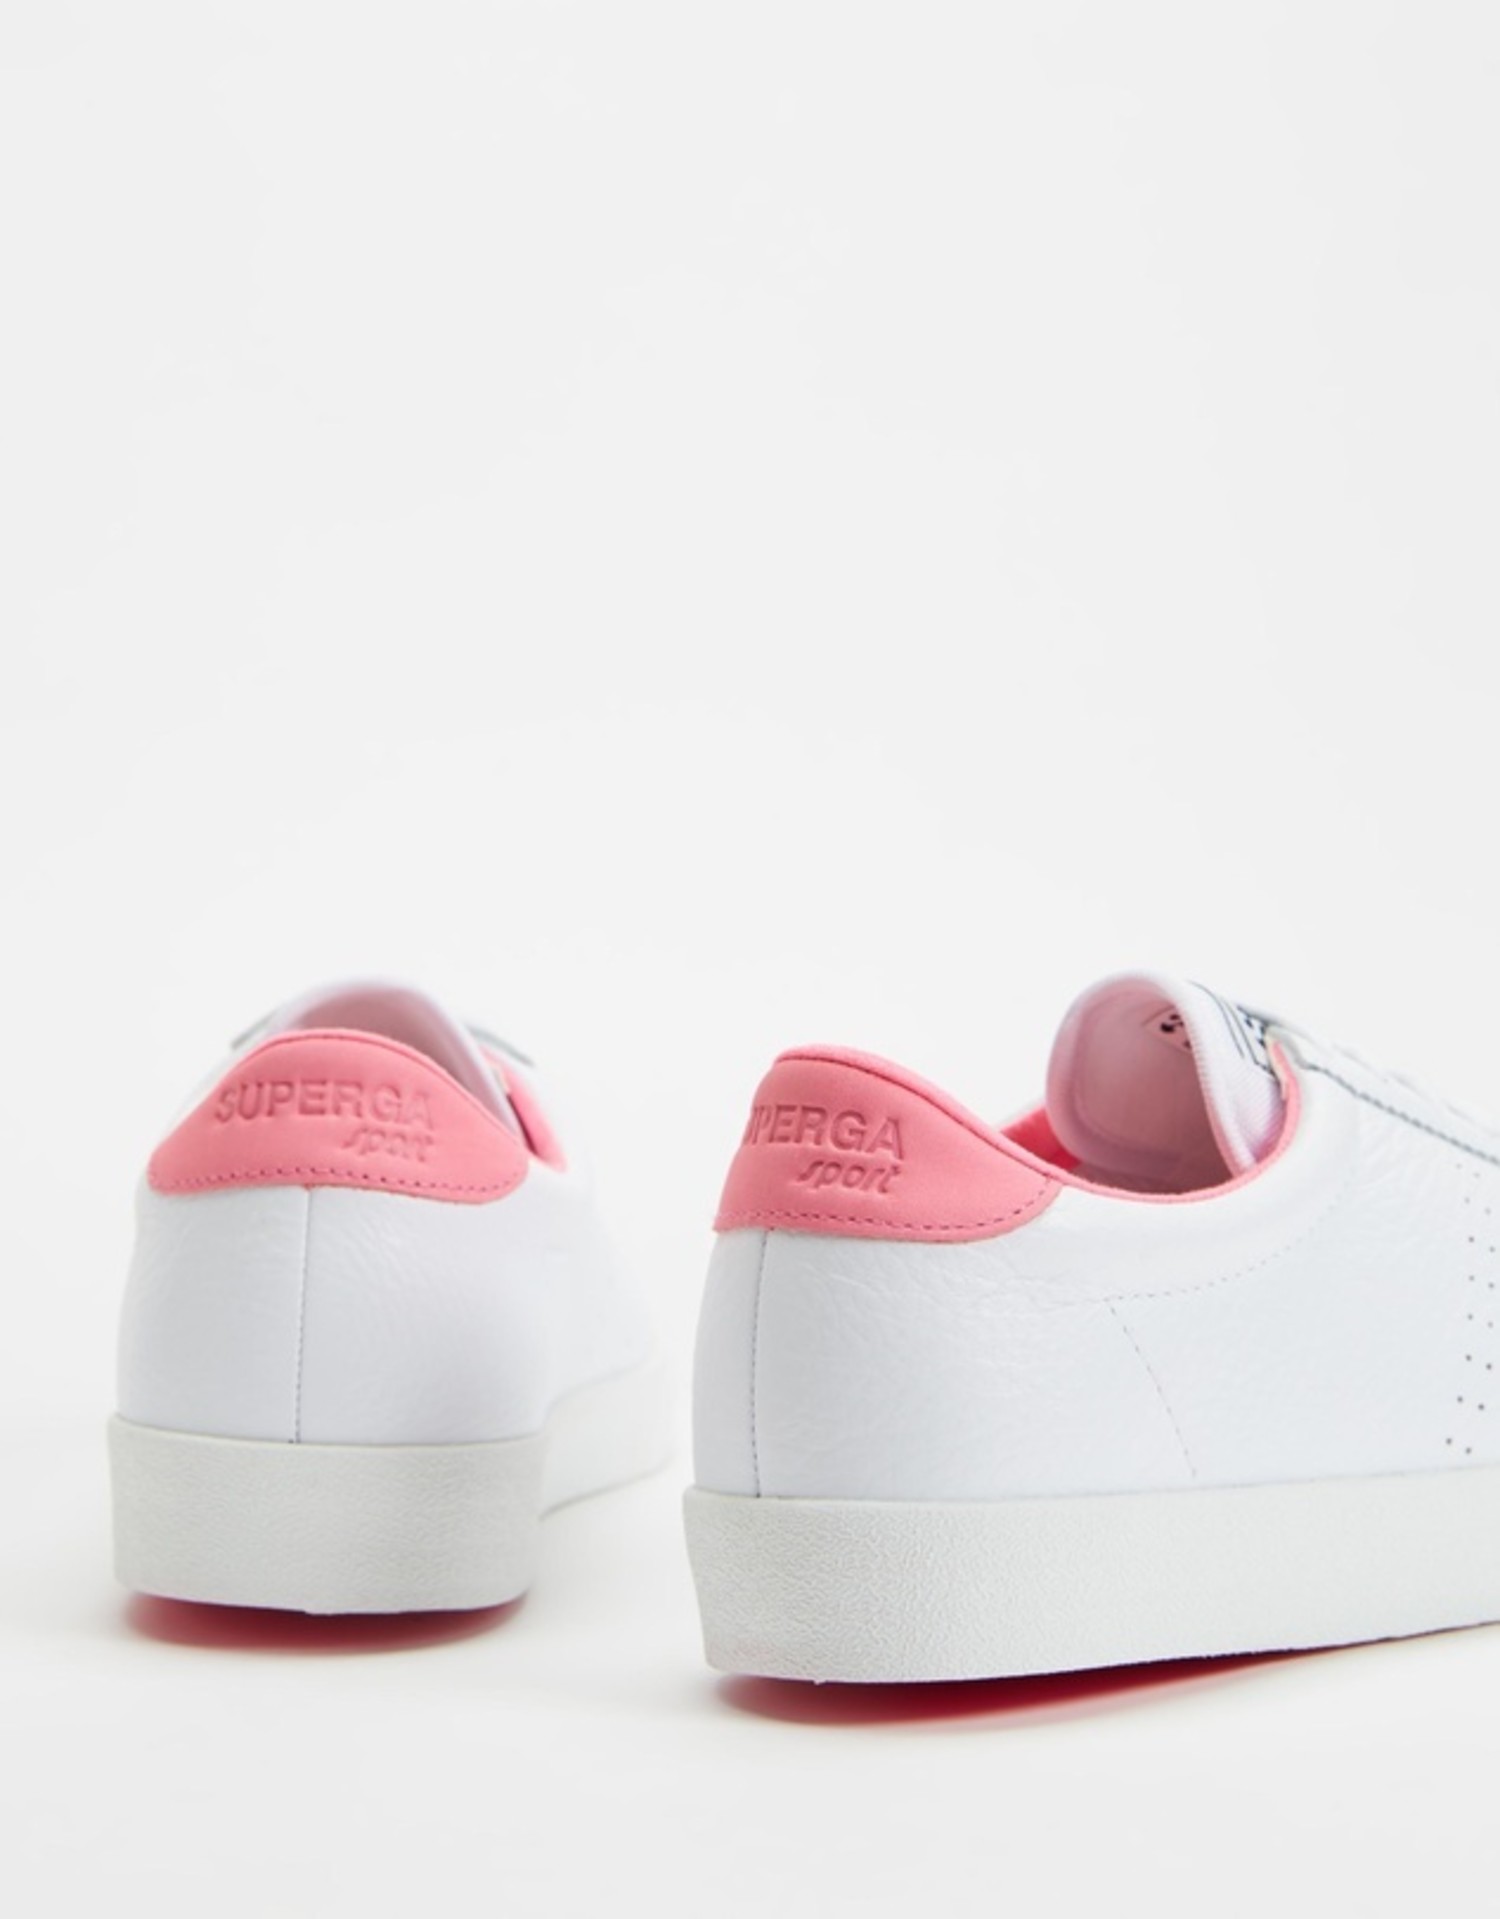 SUPERGA 2843 CLUB S COMFORT LEATHER Clever Ain't Wise